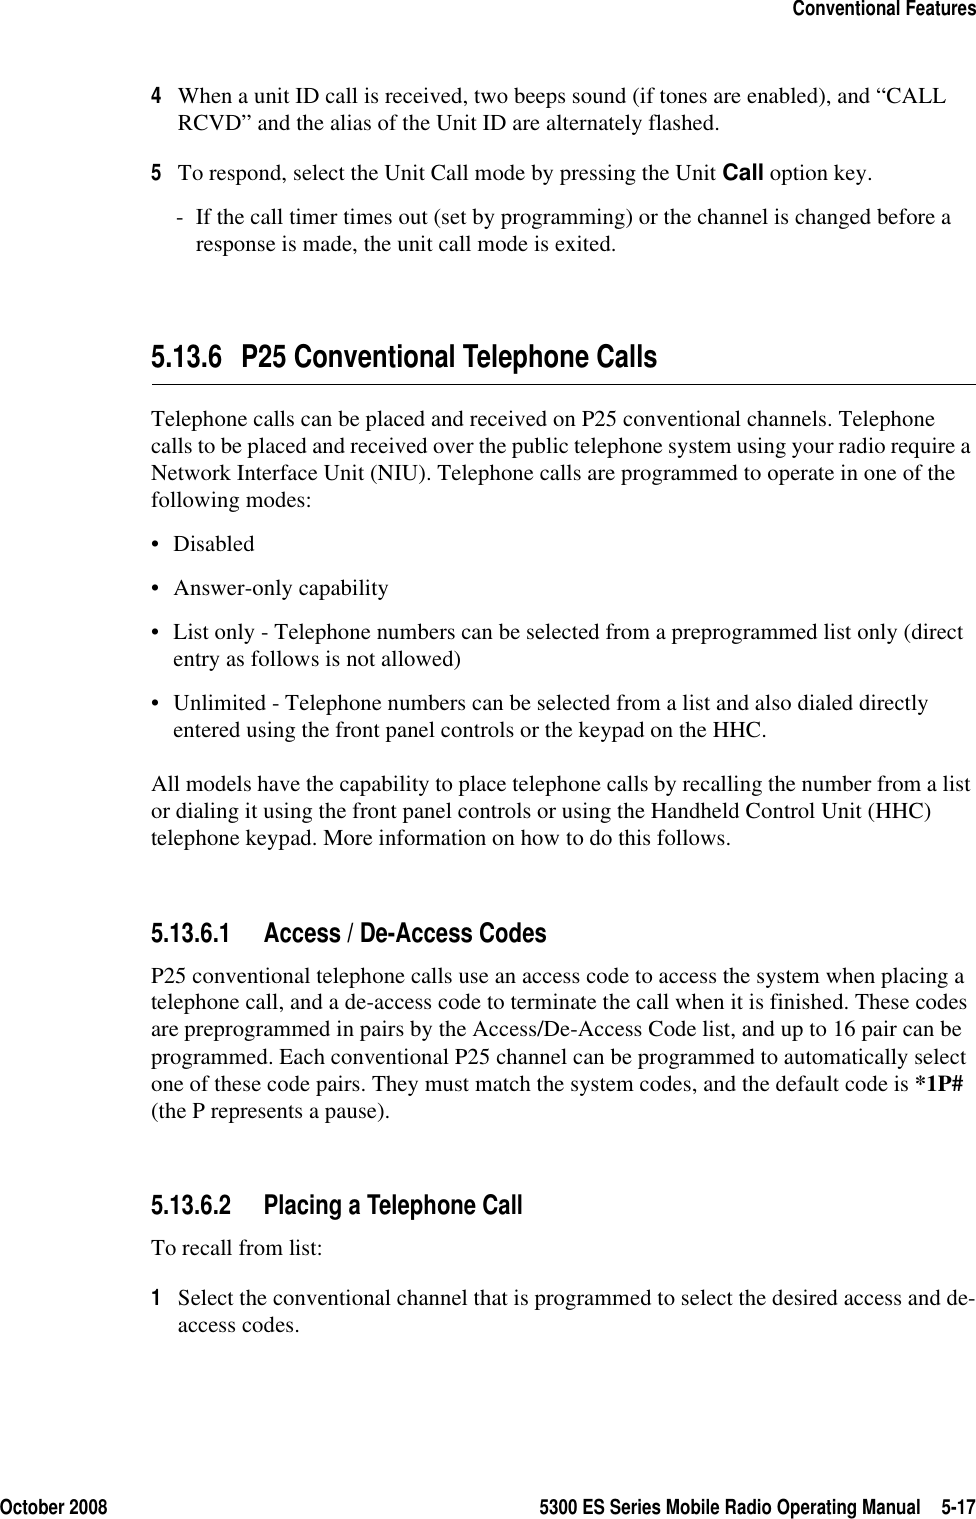 October 2008 5300 ES Series Mobile Radio Operating Manual 5-17Conventional Features4When a unit ID call is received, two beeps sound (if tones are enabled), and “CALL RCVD” and the alias of the Unit ID are alternately flashed.5To respond, select the Unit Call mode by pressing the Unit Call option key. - If the call timer times out (set by programming) or the channel is changed before a response is made, the unit call mode is exited.5.13.6 P25 Conventional Telephone CallsTelephone calls can be placed and received on P25 conventional channels. Telephone calls to be placed and received over the public telephone system using your radio require a Network Interface Unit (NIU). Telephone calls are programmed to operate in one of the following modes:•Disabled• Answer-only capability• List only - Telephone numbers can be selected from a preprogrammed list only (direct entry as follows is not allowed)• Unlimited - Telephone numbers can be selected from a list and also dialed directly entered using the front panel controls or the keypad on the HHC.All models have the capability to place telephone calls by recalling the number from a list or dialing it using the front panel controls or using the Handheld Control Unit (HHC) telephone keypad. More information on how to do this follows.5.13.6.1 Access / De-Access CodesP25 conventional telephone calls use an access code to access the system when placing a telephone call, and a de-access code to terminate the call when it is finished. These codes are preprogrammed in pairs by the Access/De-Access Code list, and up to 16 pair can be programmed. Each conventional P25 channel can be programmed to automatically select one of these code pairs. They must match the system codes, and the default code is *1P# (the P represents a pause).5.13.6.2 Placing a Telephone CallTo recall from list:1Select the conventional channel that is programmed to select the desired access and de-access codes.